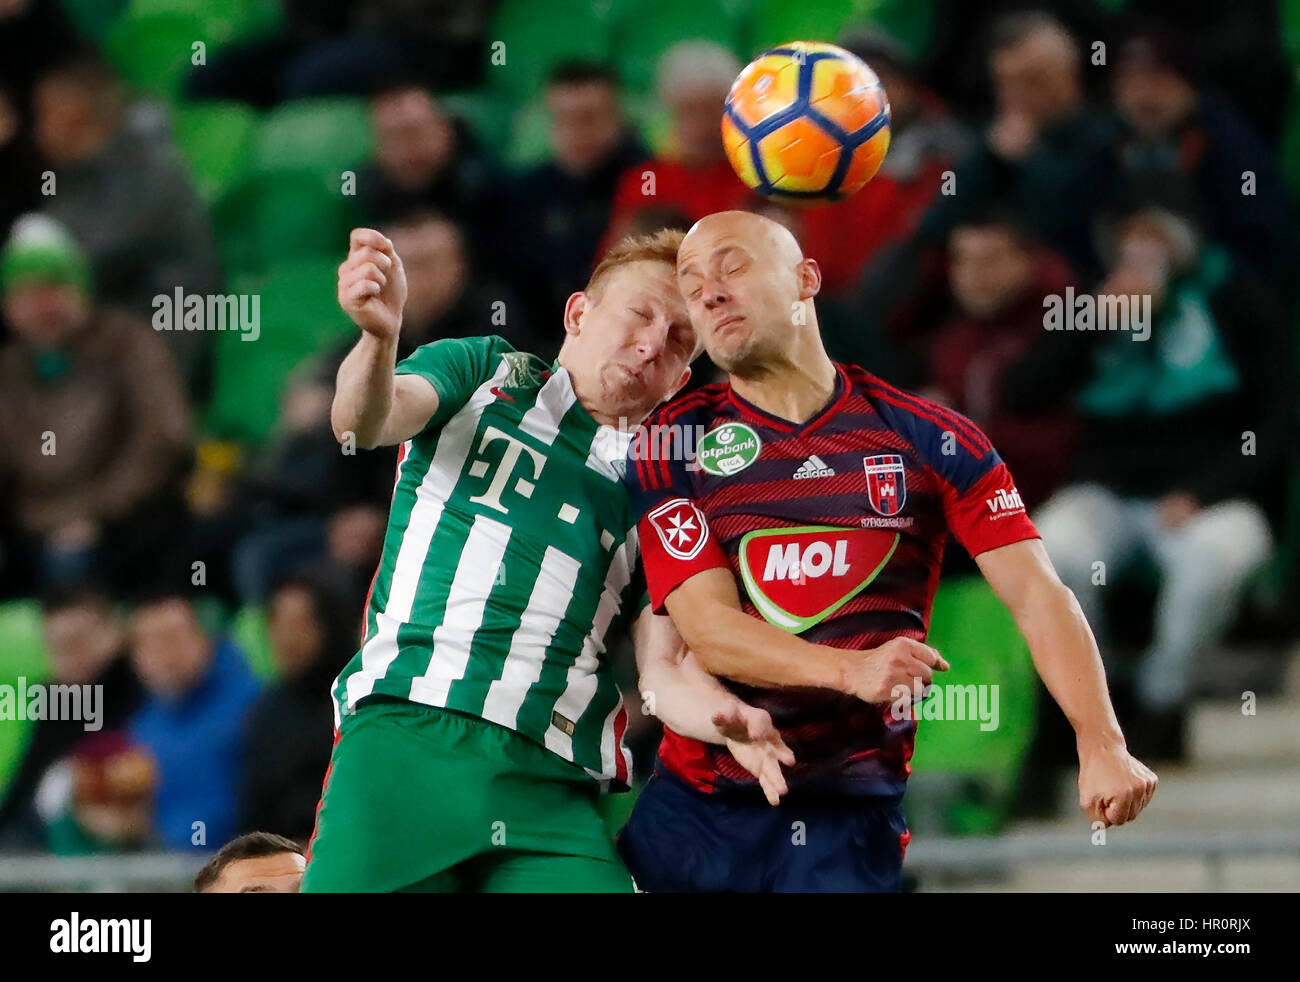 Budapest, Hungary. 25th February 2017. Laszlo Kleinheisler (L) of Ferencvarosi TC battles for the ball in the air with Jozsef Varga (R) of Videoton FC during the Hungarian OTP Bank Liga match between Ferencvarosi TC and Videoton FC at Groupama Arena on February 25, 2017 in Budapest, Hungary. Credit: Laszlo Szirtesi/Alamy Live News Stock Photo